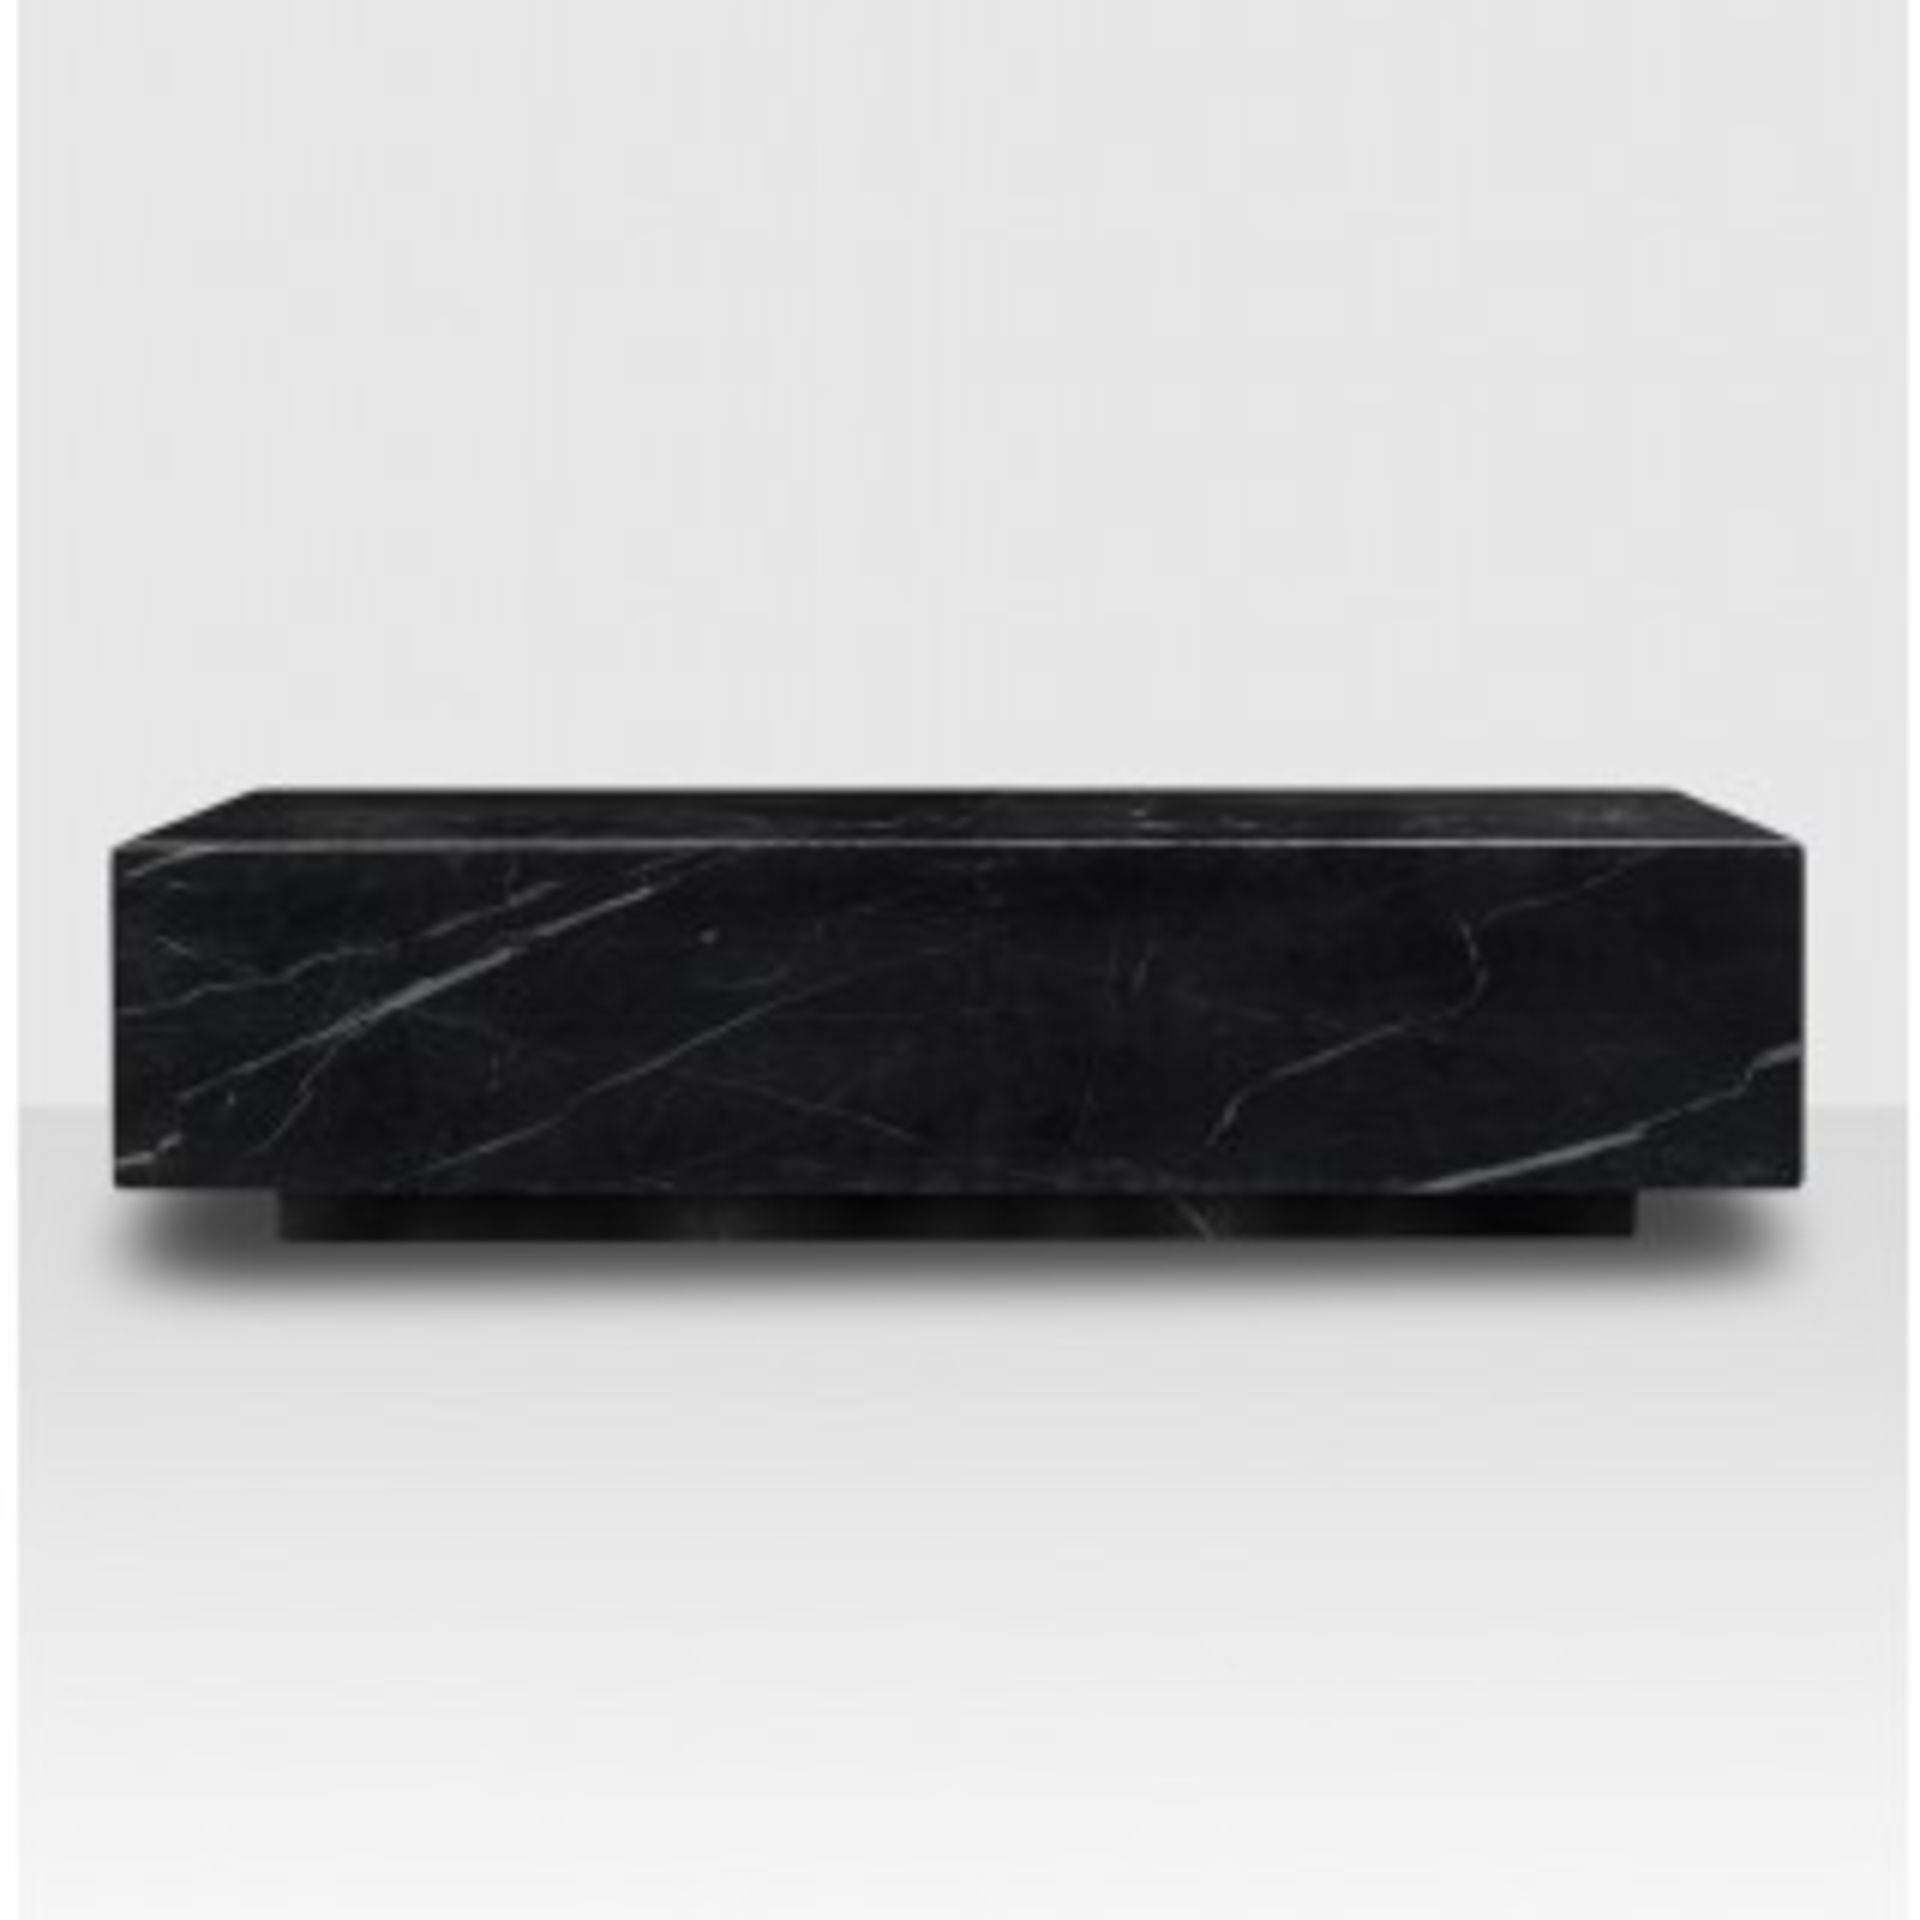 Marble Floating Coffee Table 150x90cm Black Polished Marble 150 x 90 x 42cm RRP £520